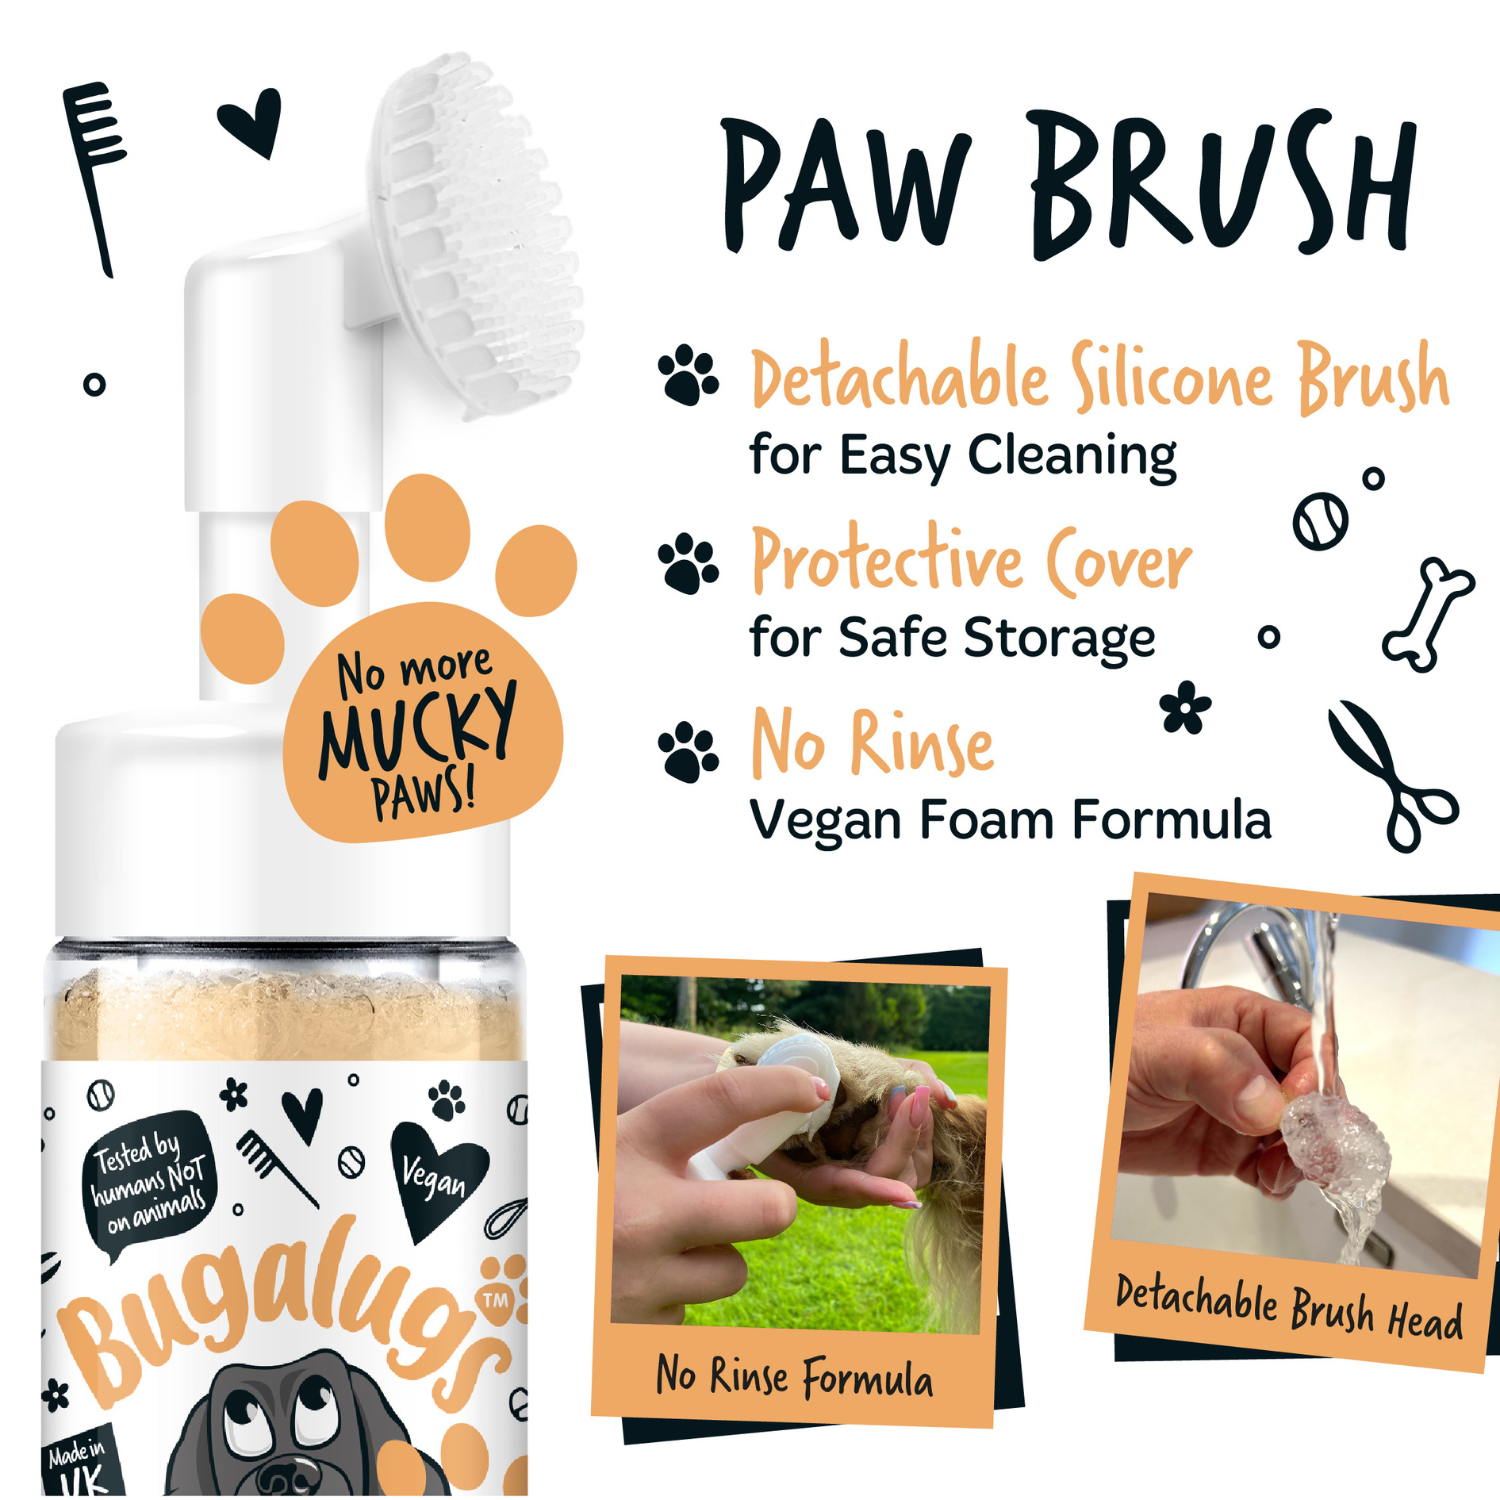 Bugalugs No Rinse Oatmeal Paw Cleaner Foam Shampoo - Paw brush - No more mucky paws